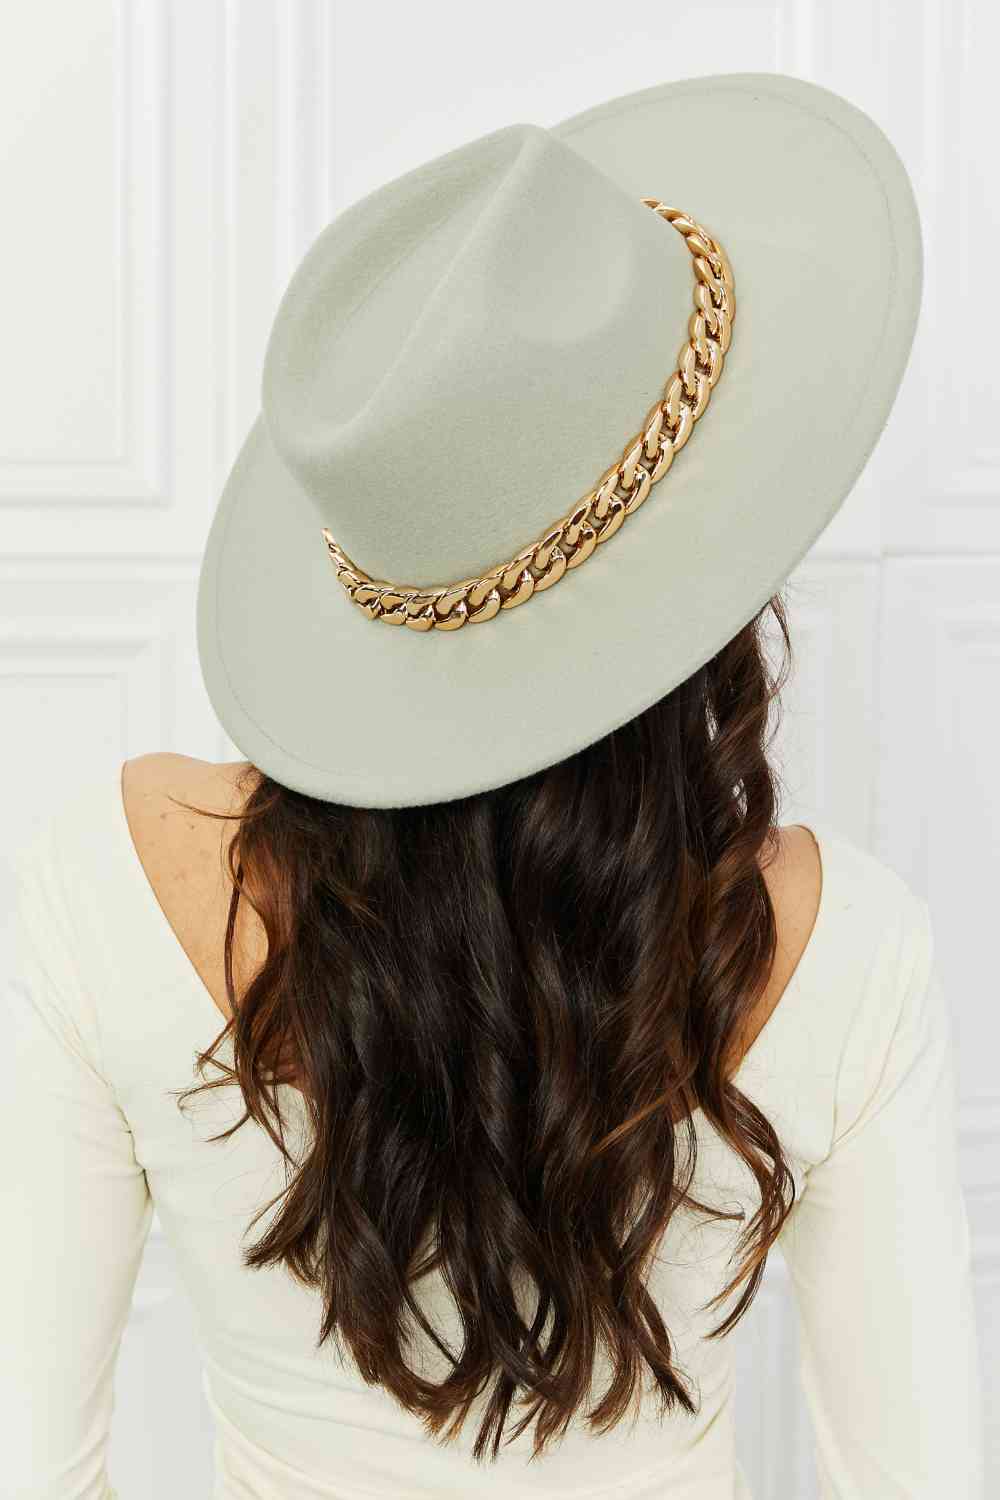 Fame Keep Your Promise Fedora Hat in Mint Light Green One Size